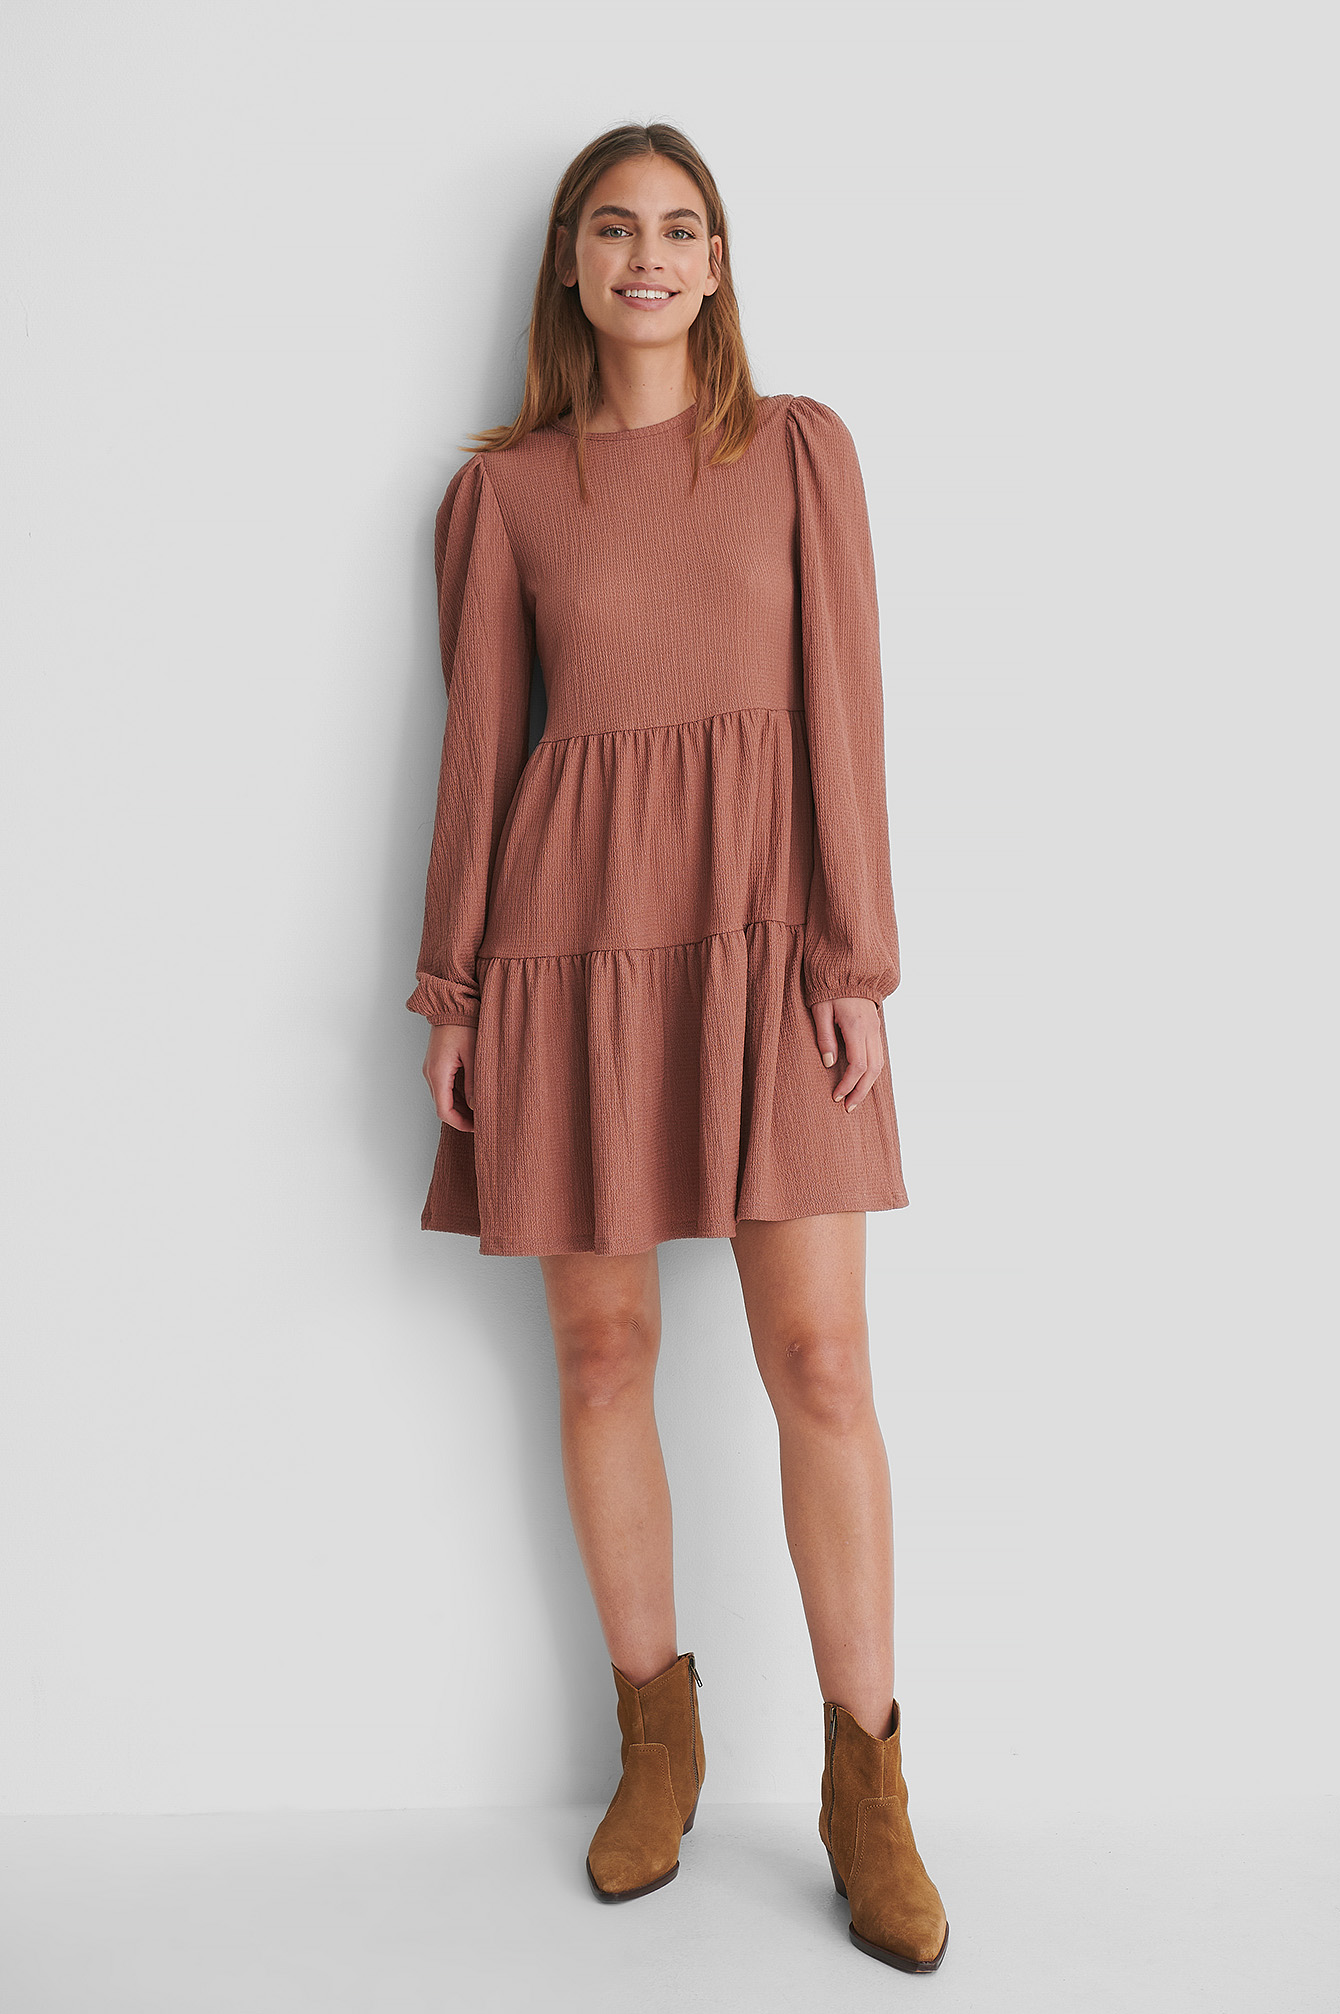 Crepe Puff Sleeve Dress with Boots.